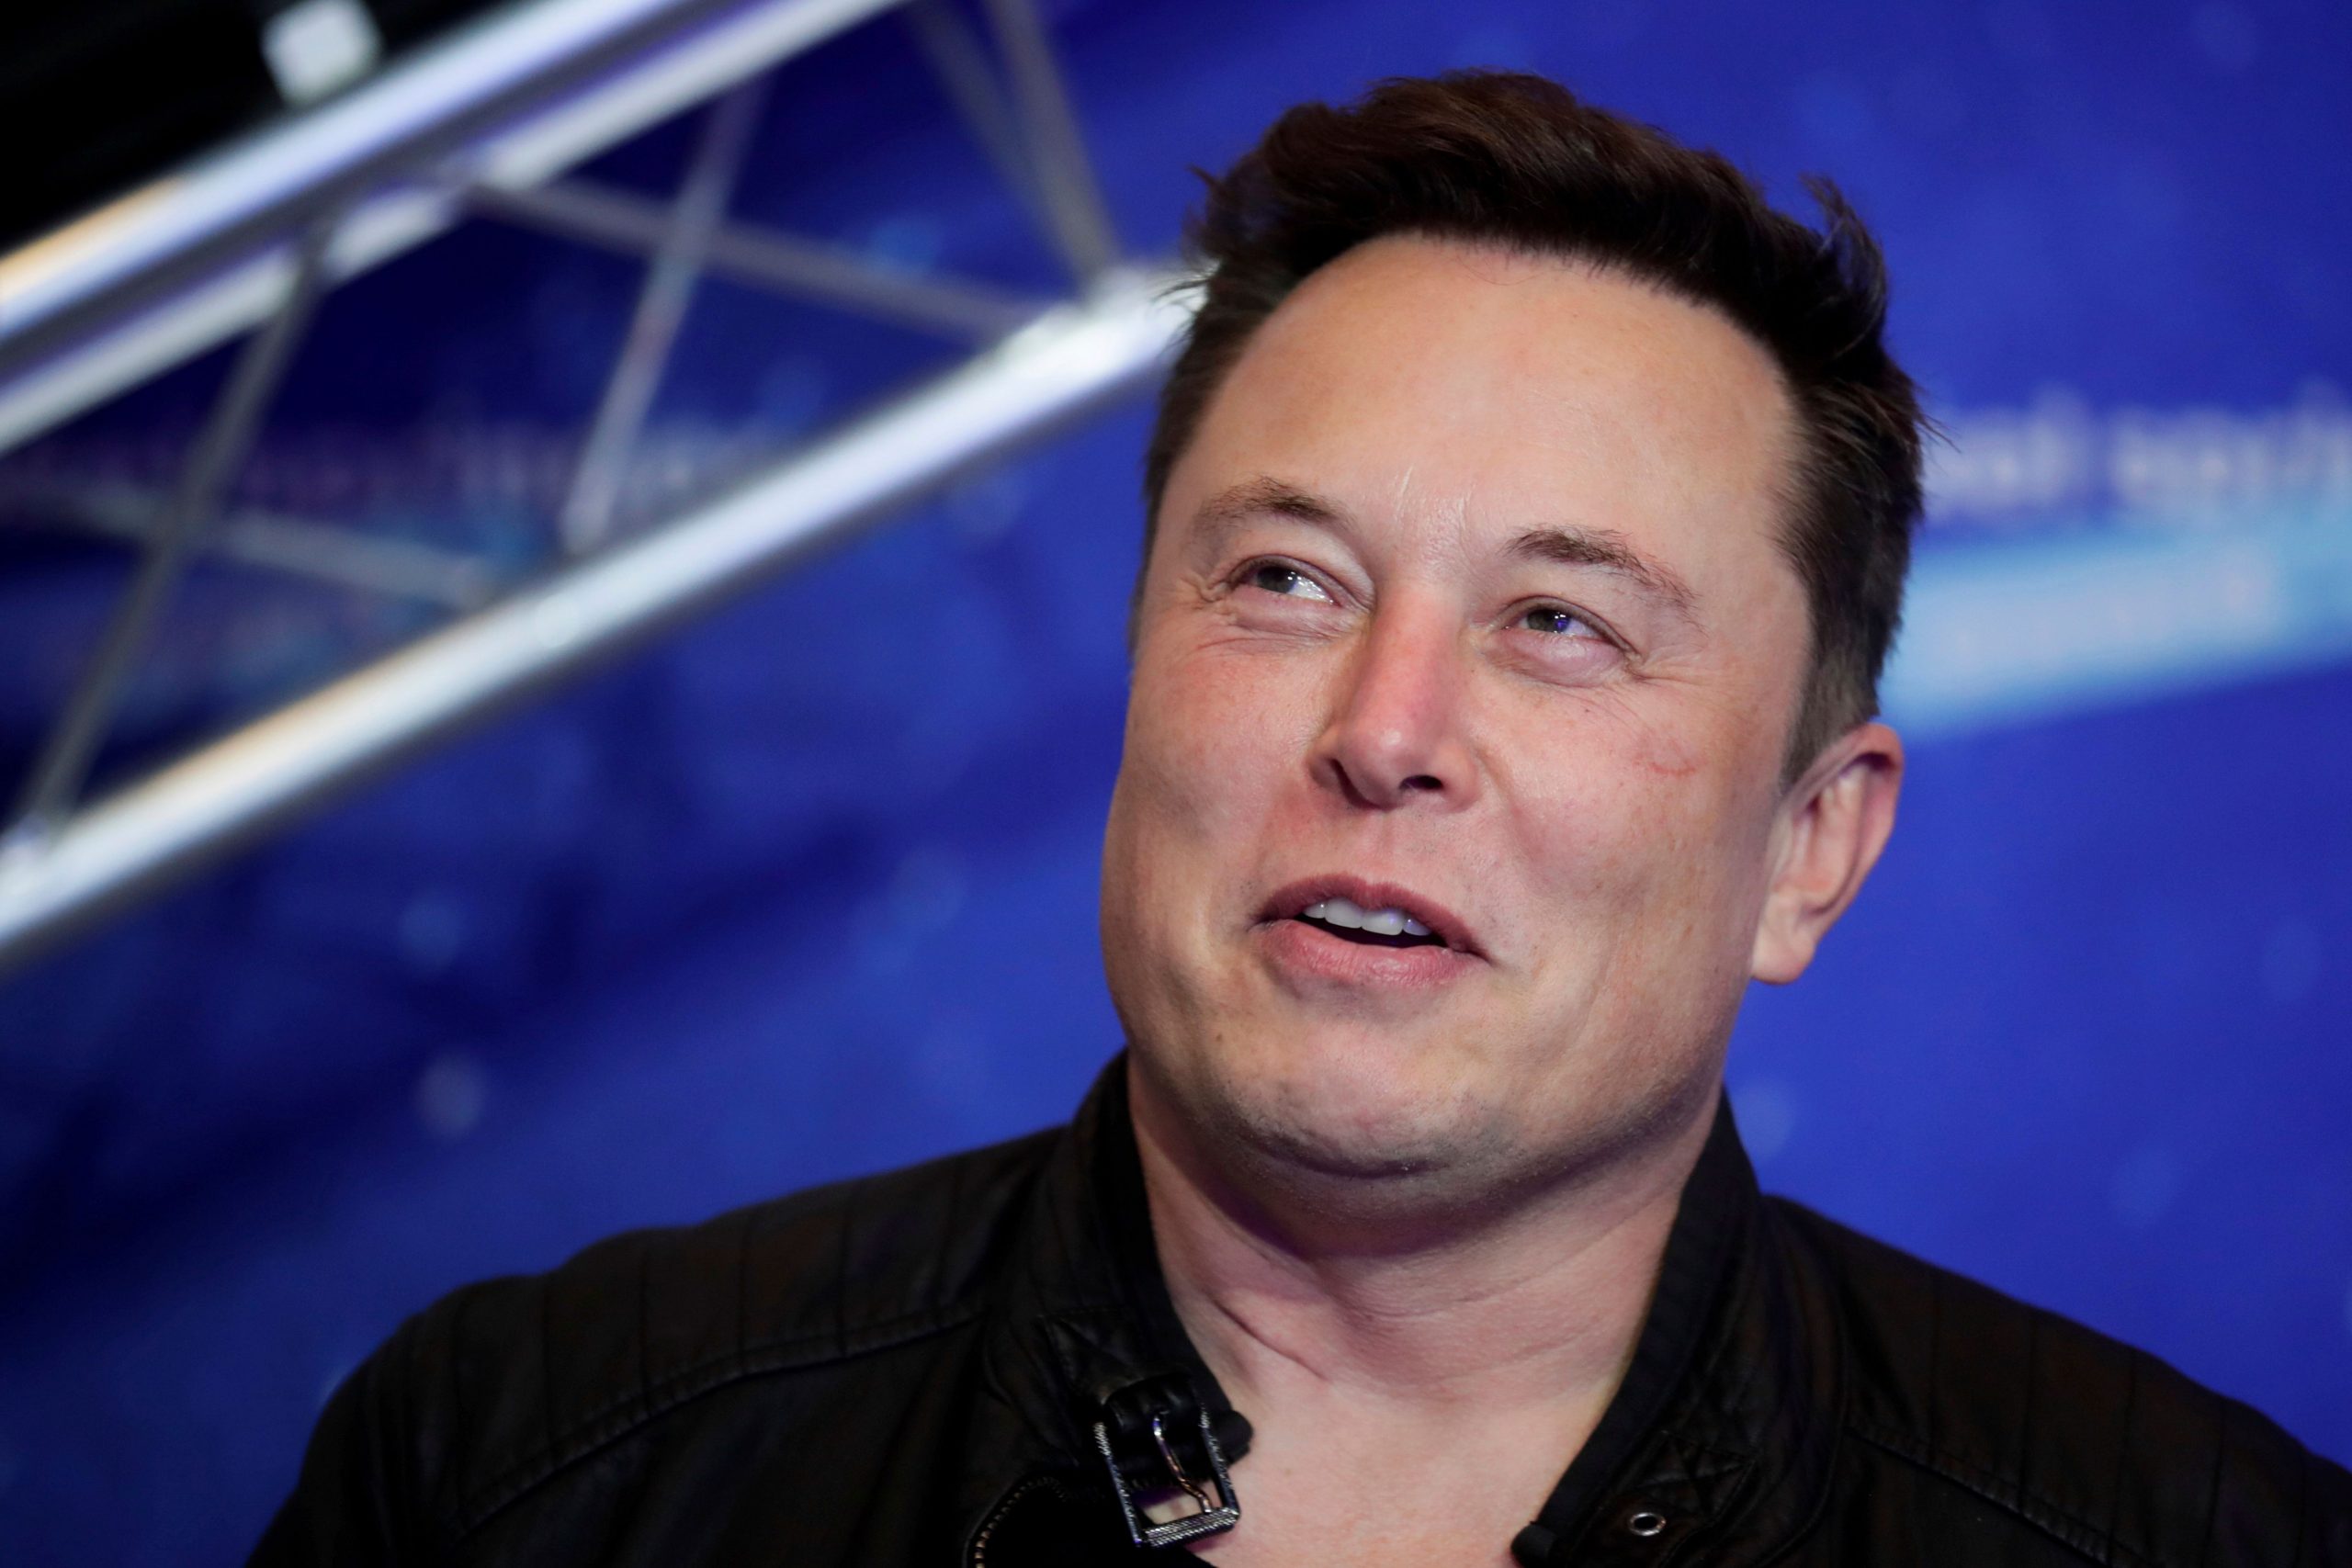 SpaceX president extend support to Elon Musk against sexual harassment allegation: Report